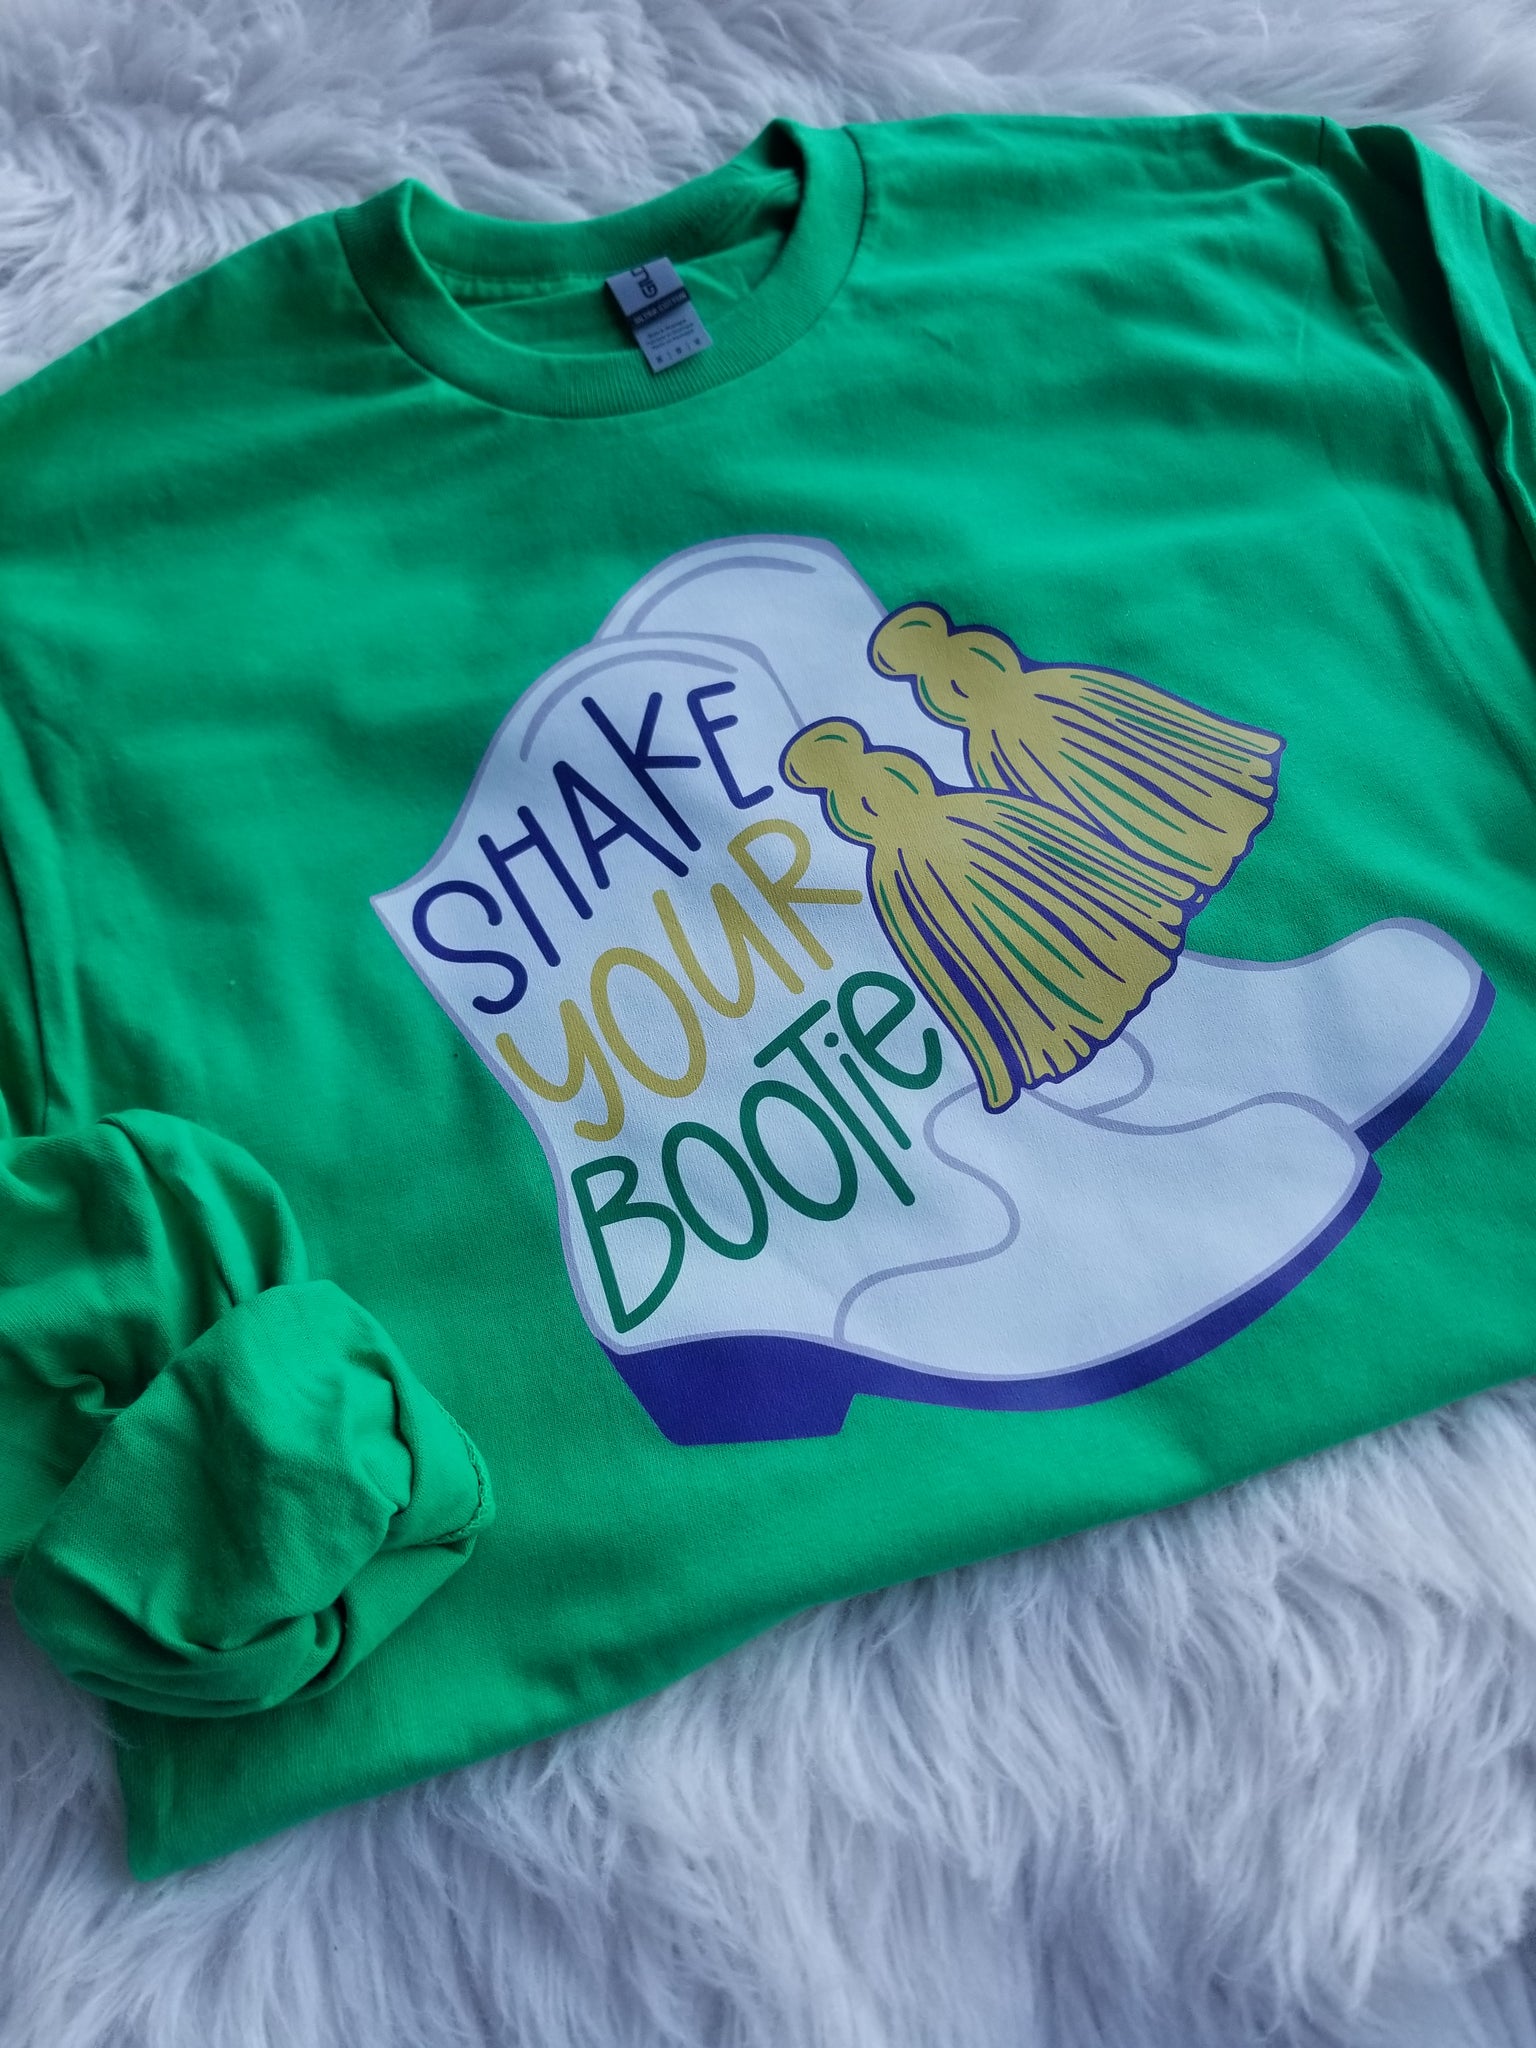 Shake your bootie